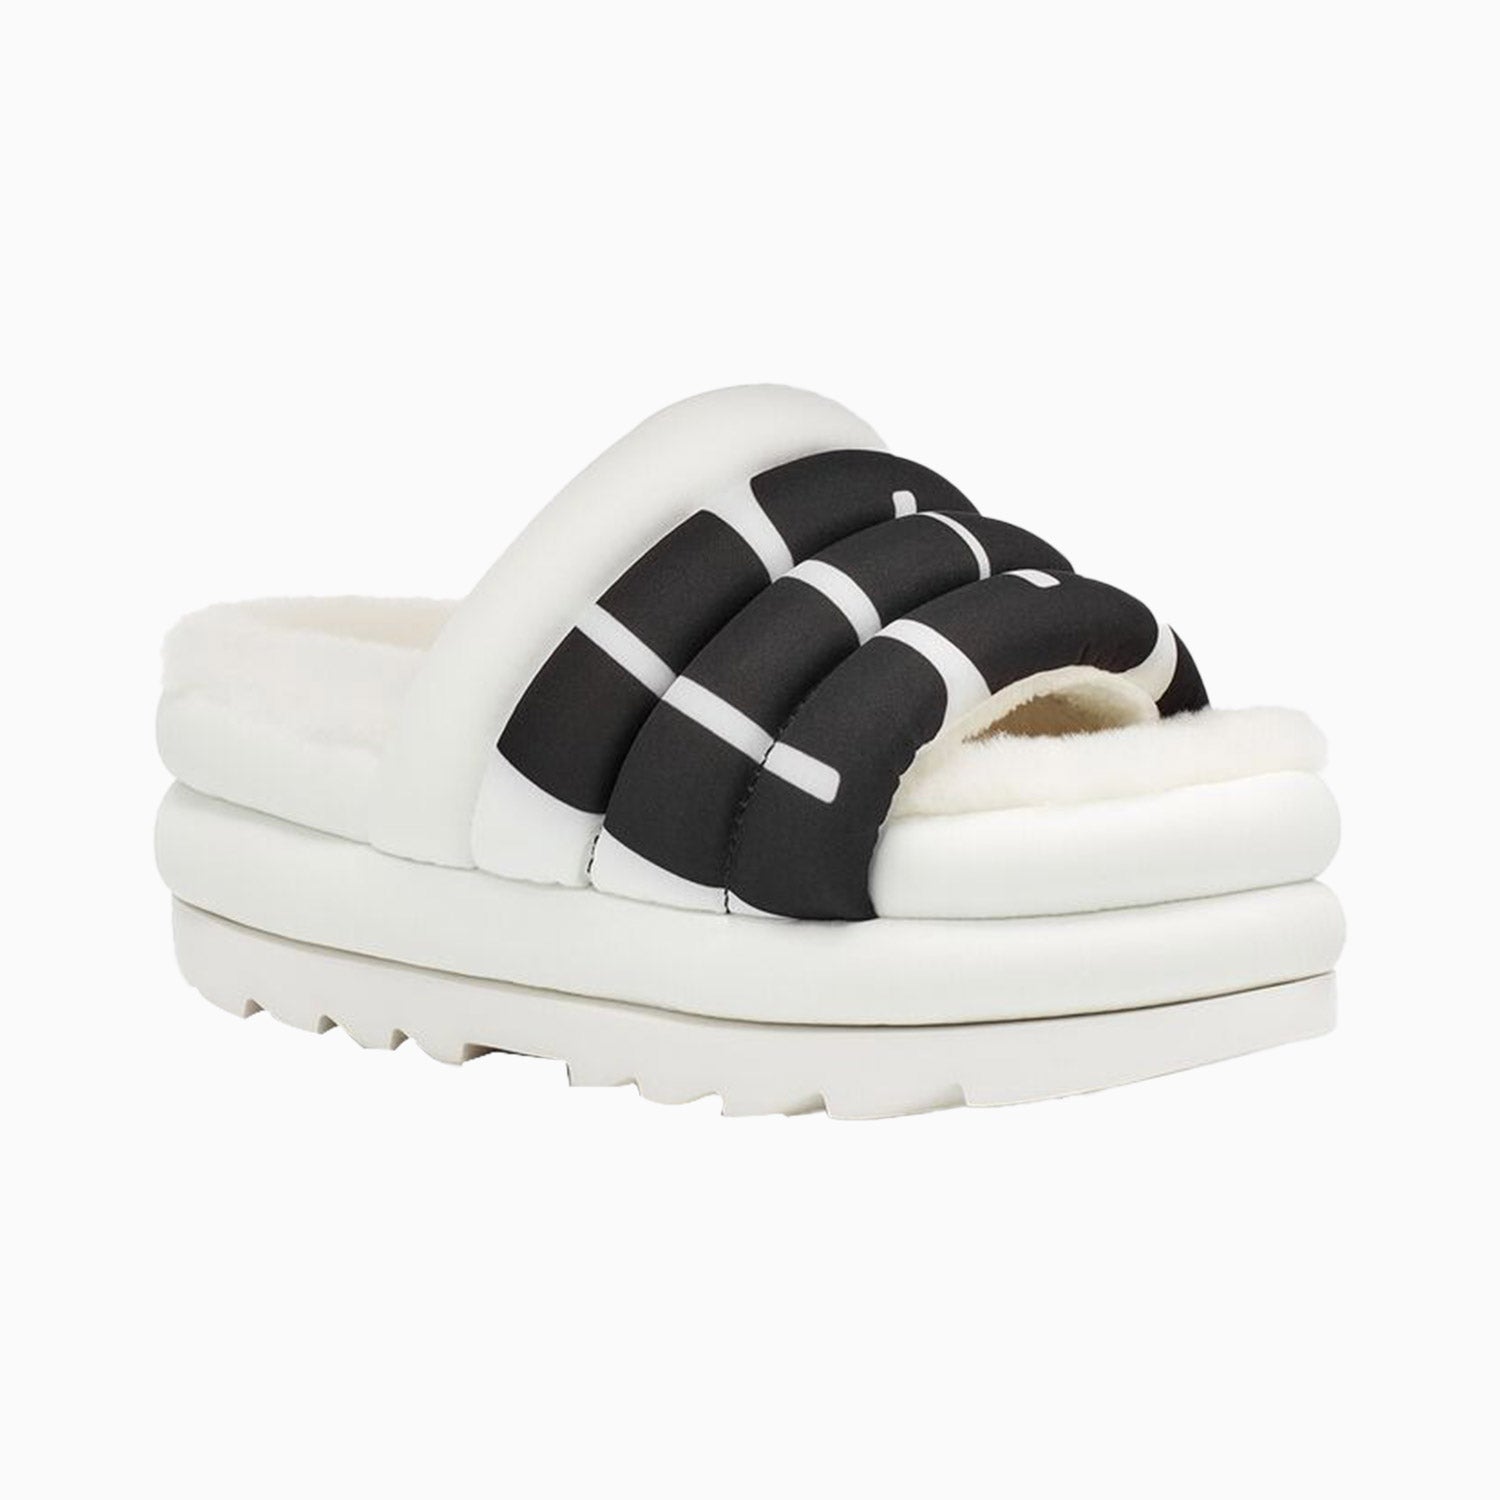 UGG Women's Maxi Slide - Color: Black, White, Pink Scallop - Tops and Bottoms USA -